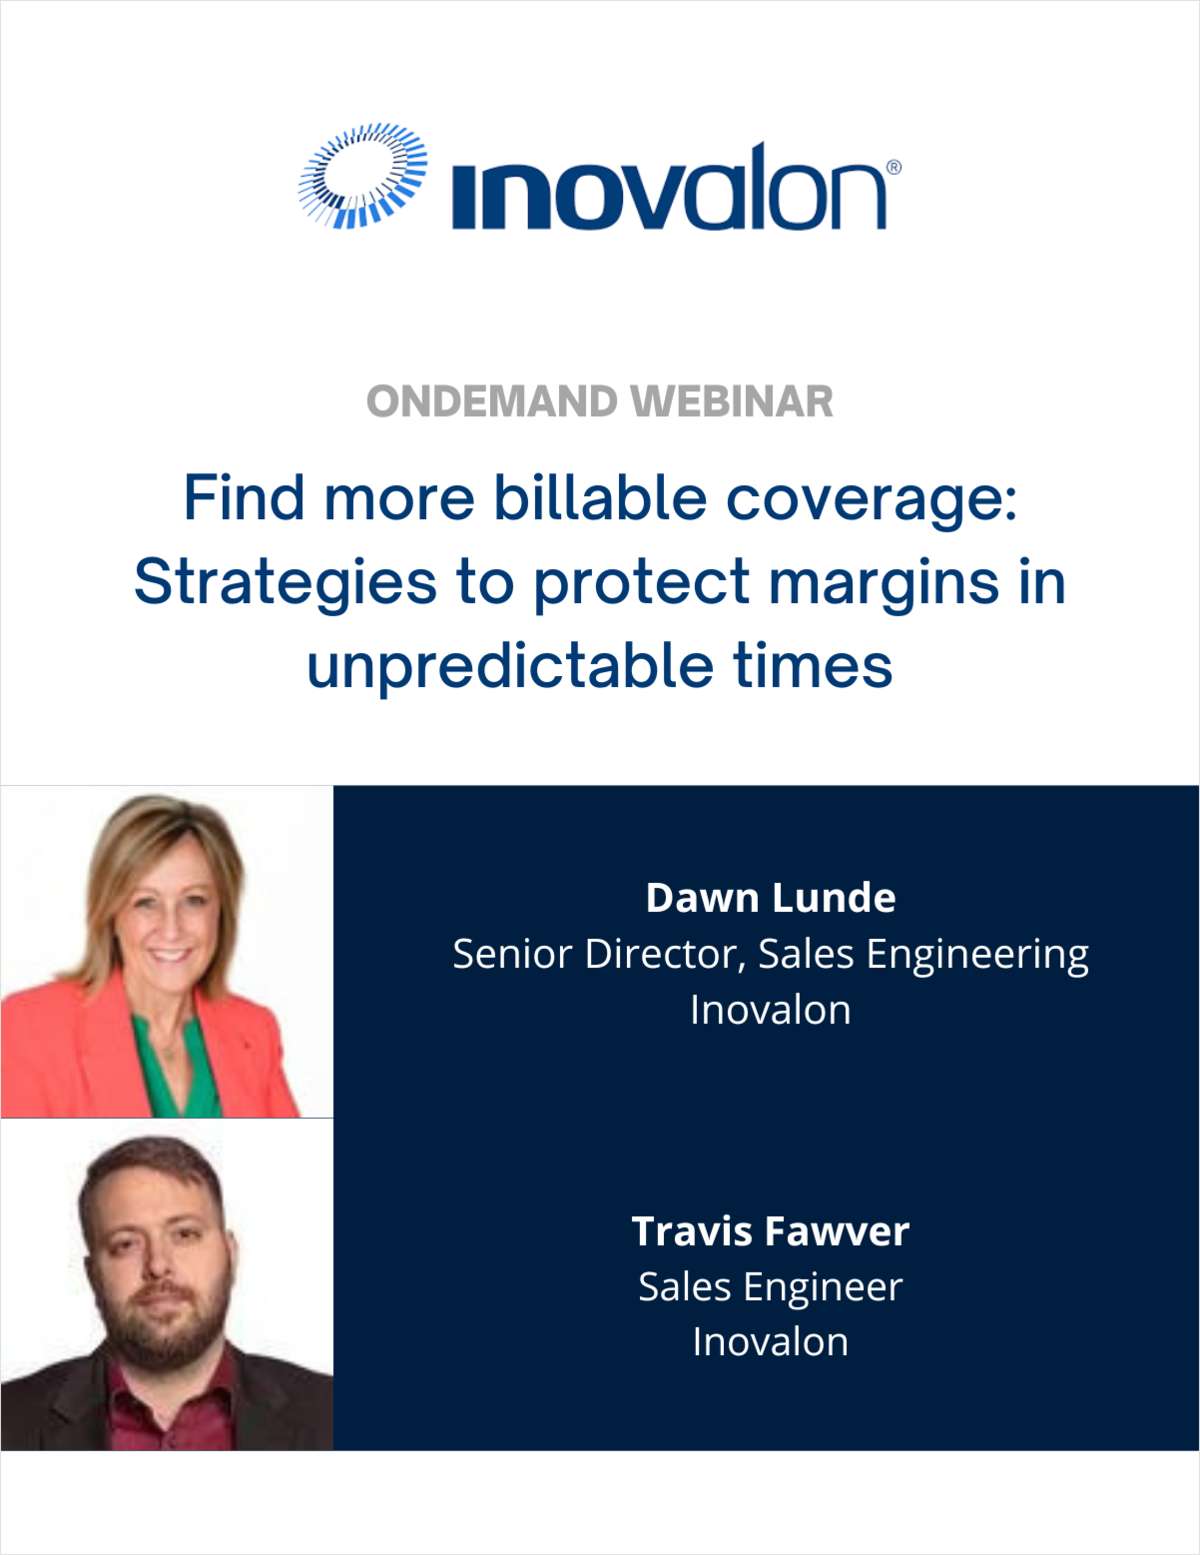 Find more billable coverage: Strategies to protect margins in unpredictable times